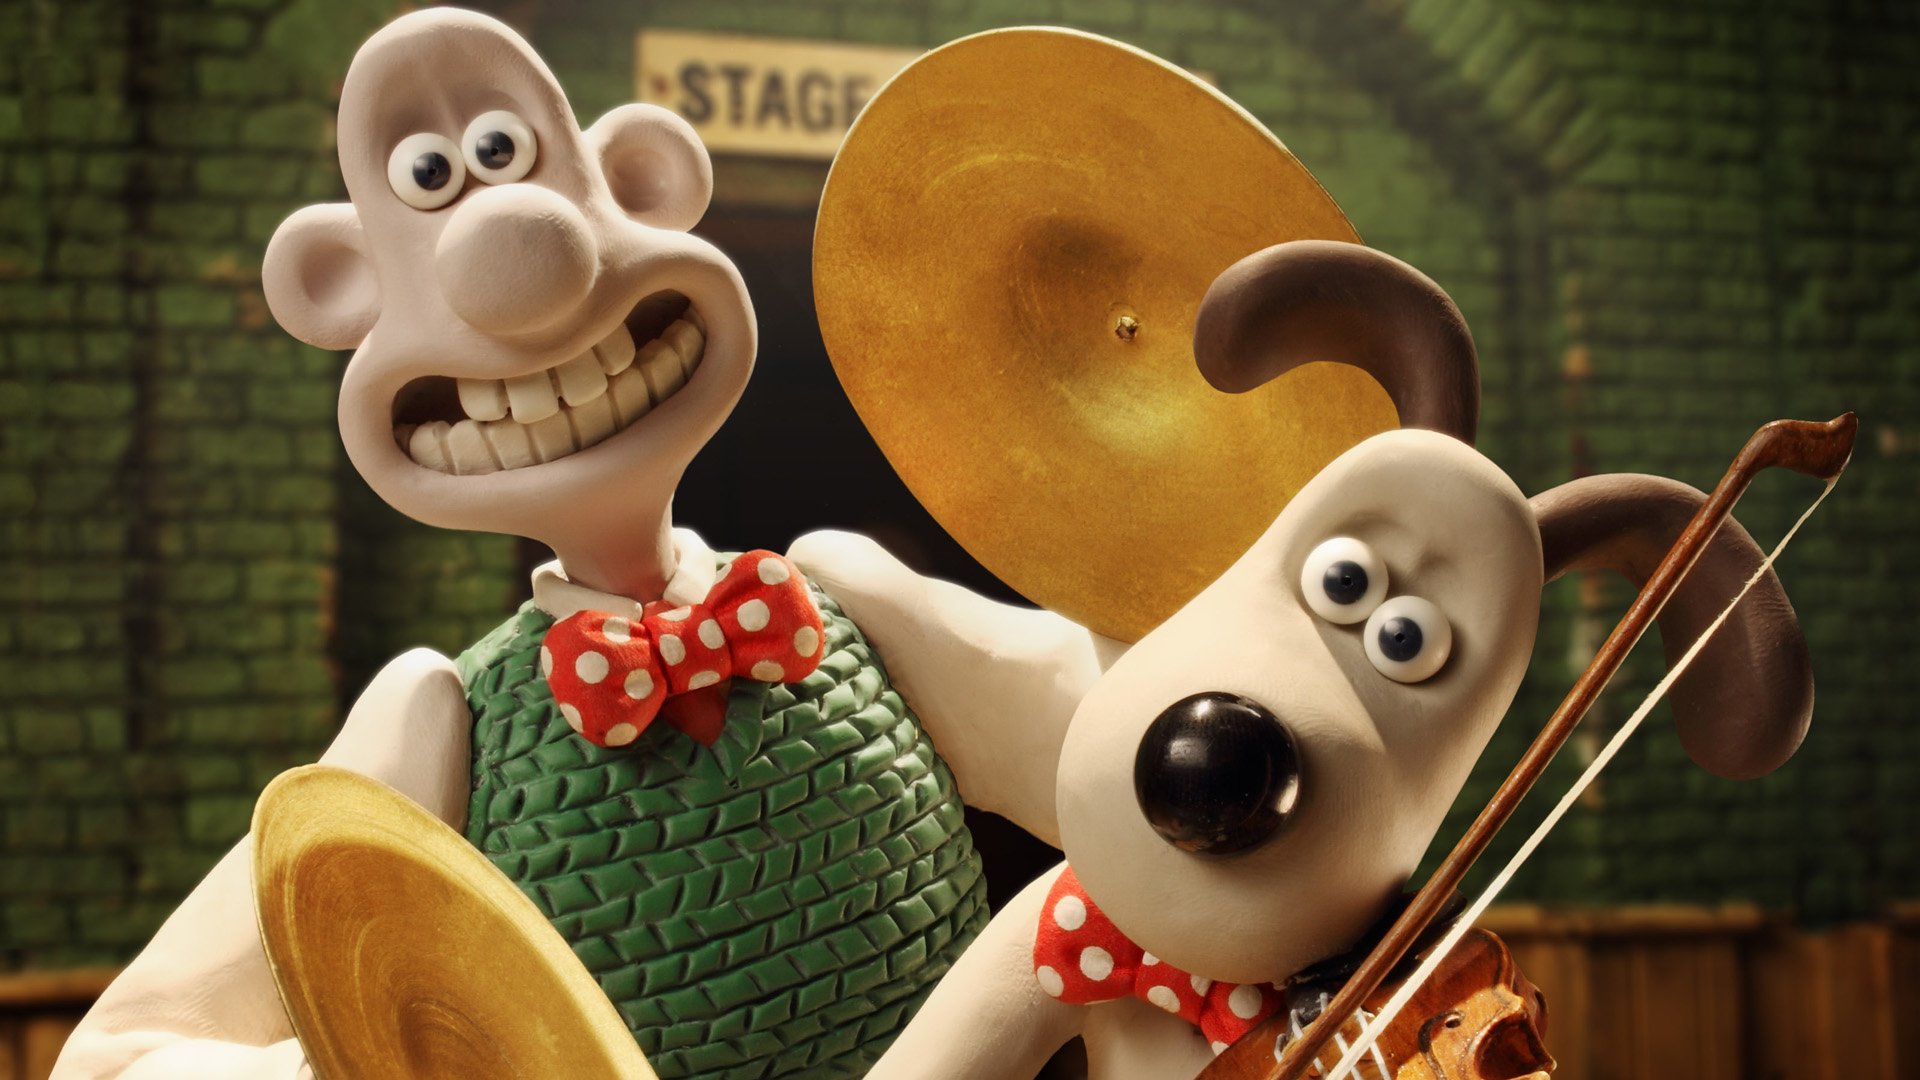 Wallace Gromit HD Wallpaper Background Image 1920x1080 1920x1080